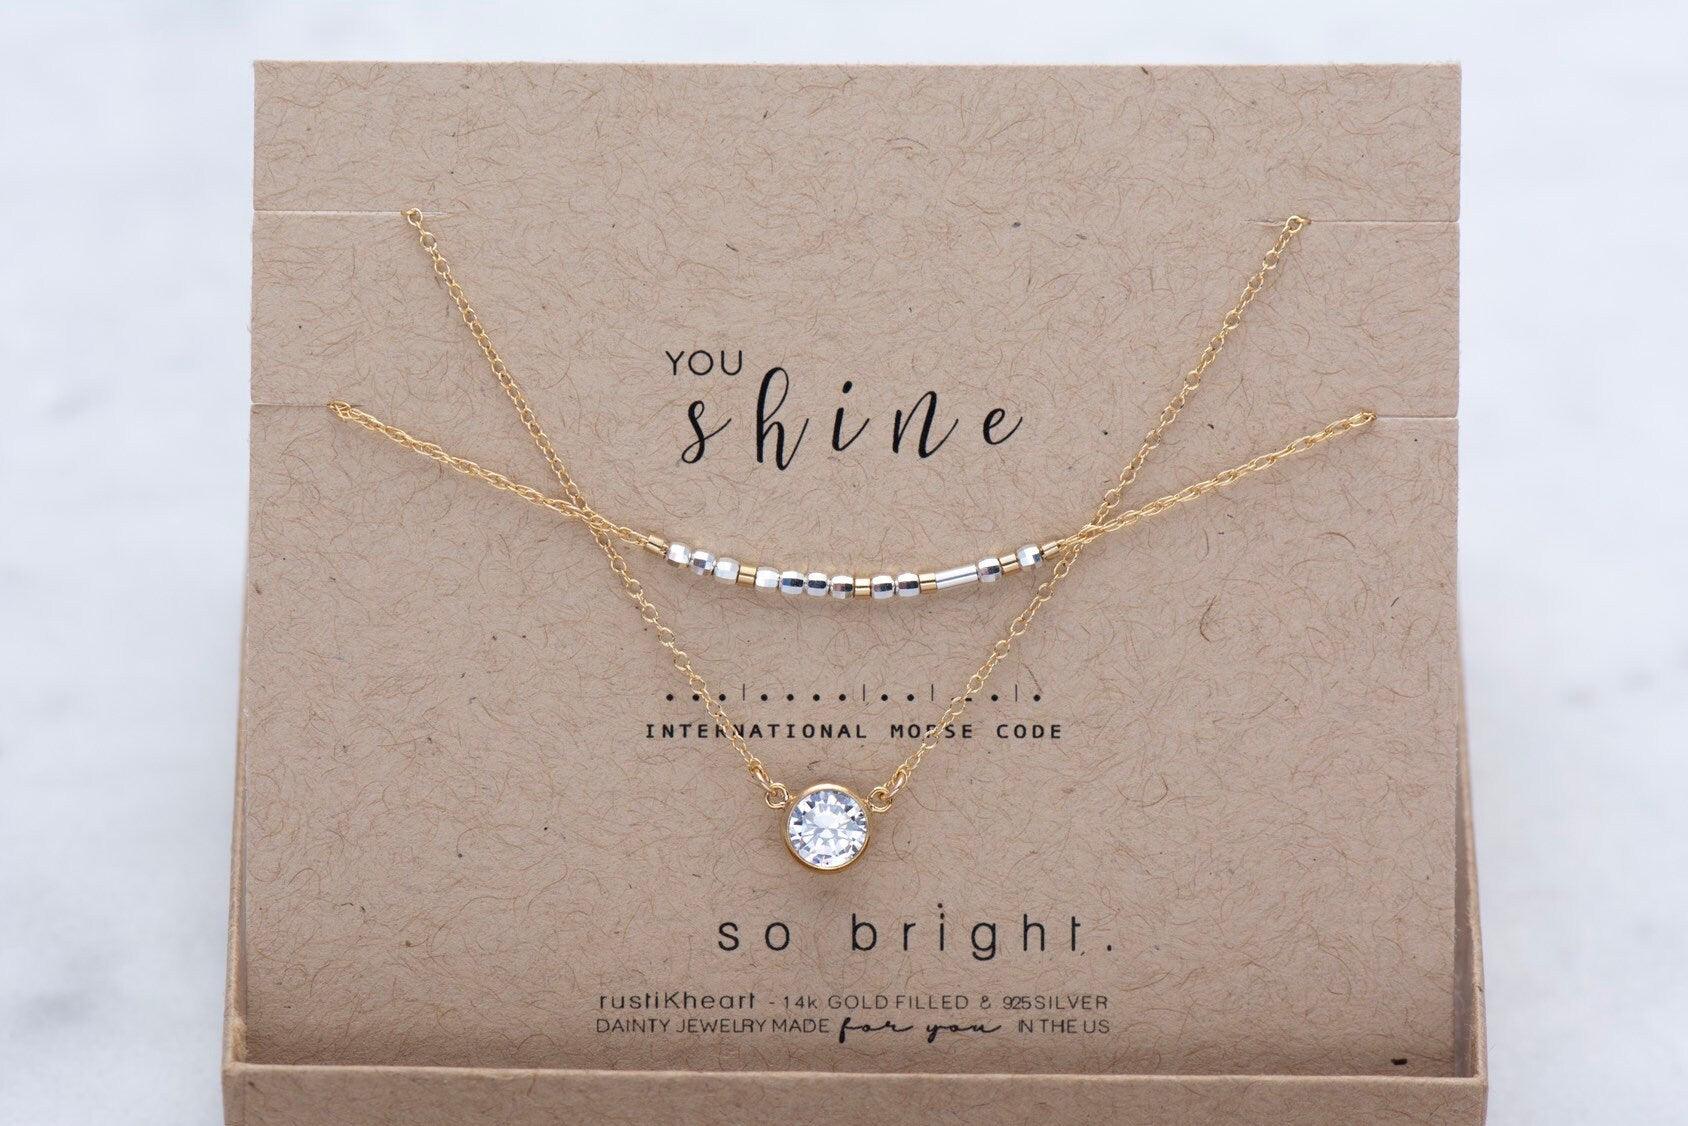 Shine Morse Code Necklace • Shine Bright best friend gifts •Graduation Gift for Graduate • Congrats Shining necklace motivational gift - Morse and Dainty